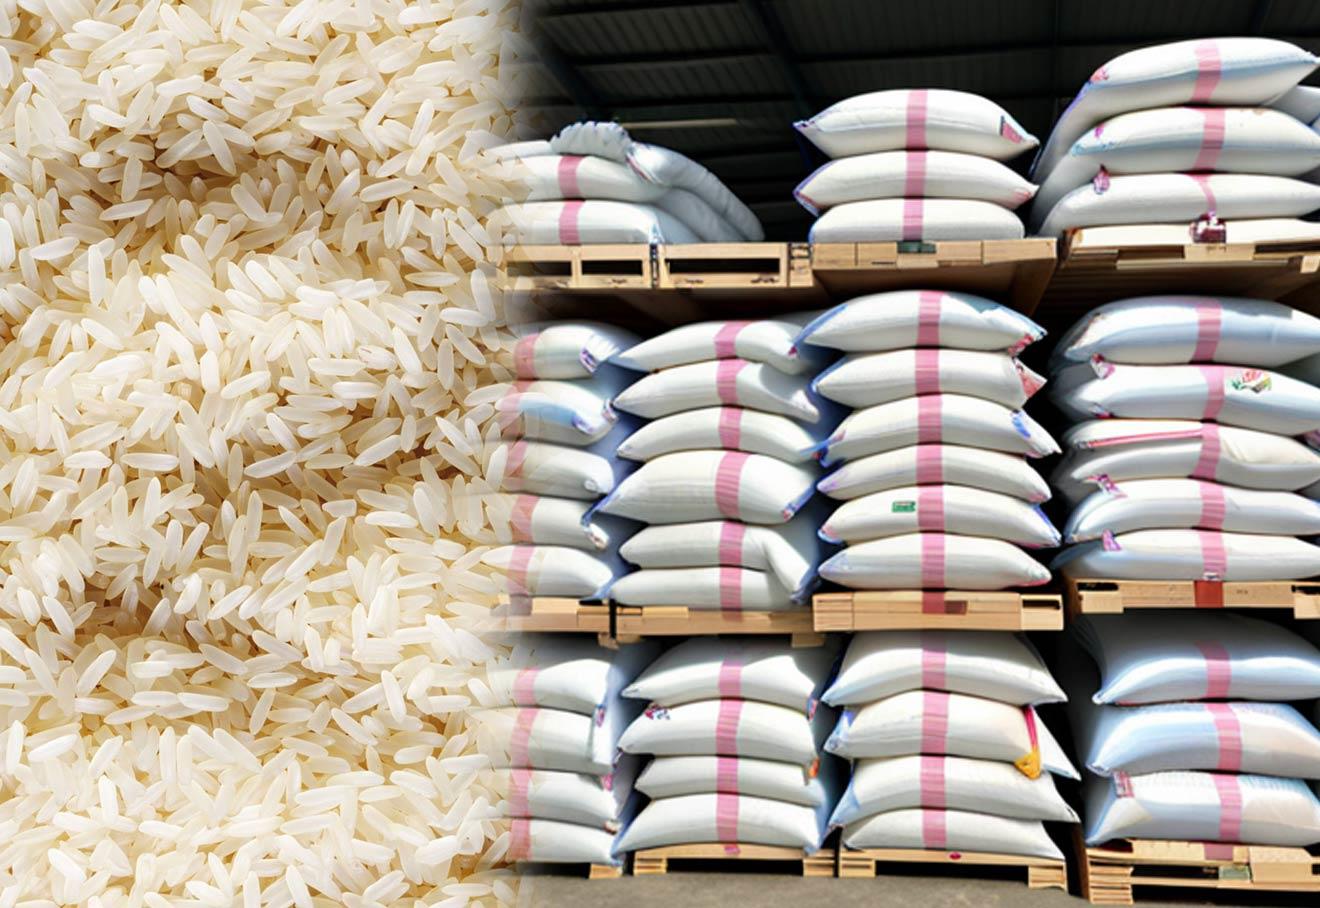 Malaysia To Pursue India On Finding Best Solution Over Rice Export Ban